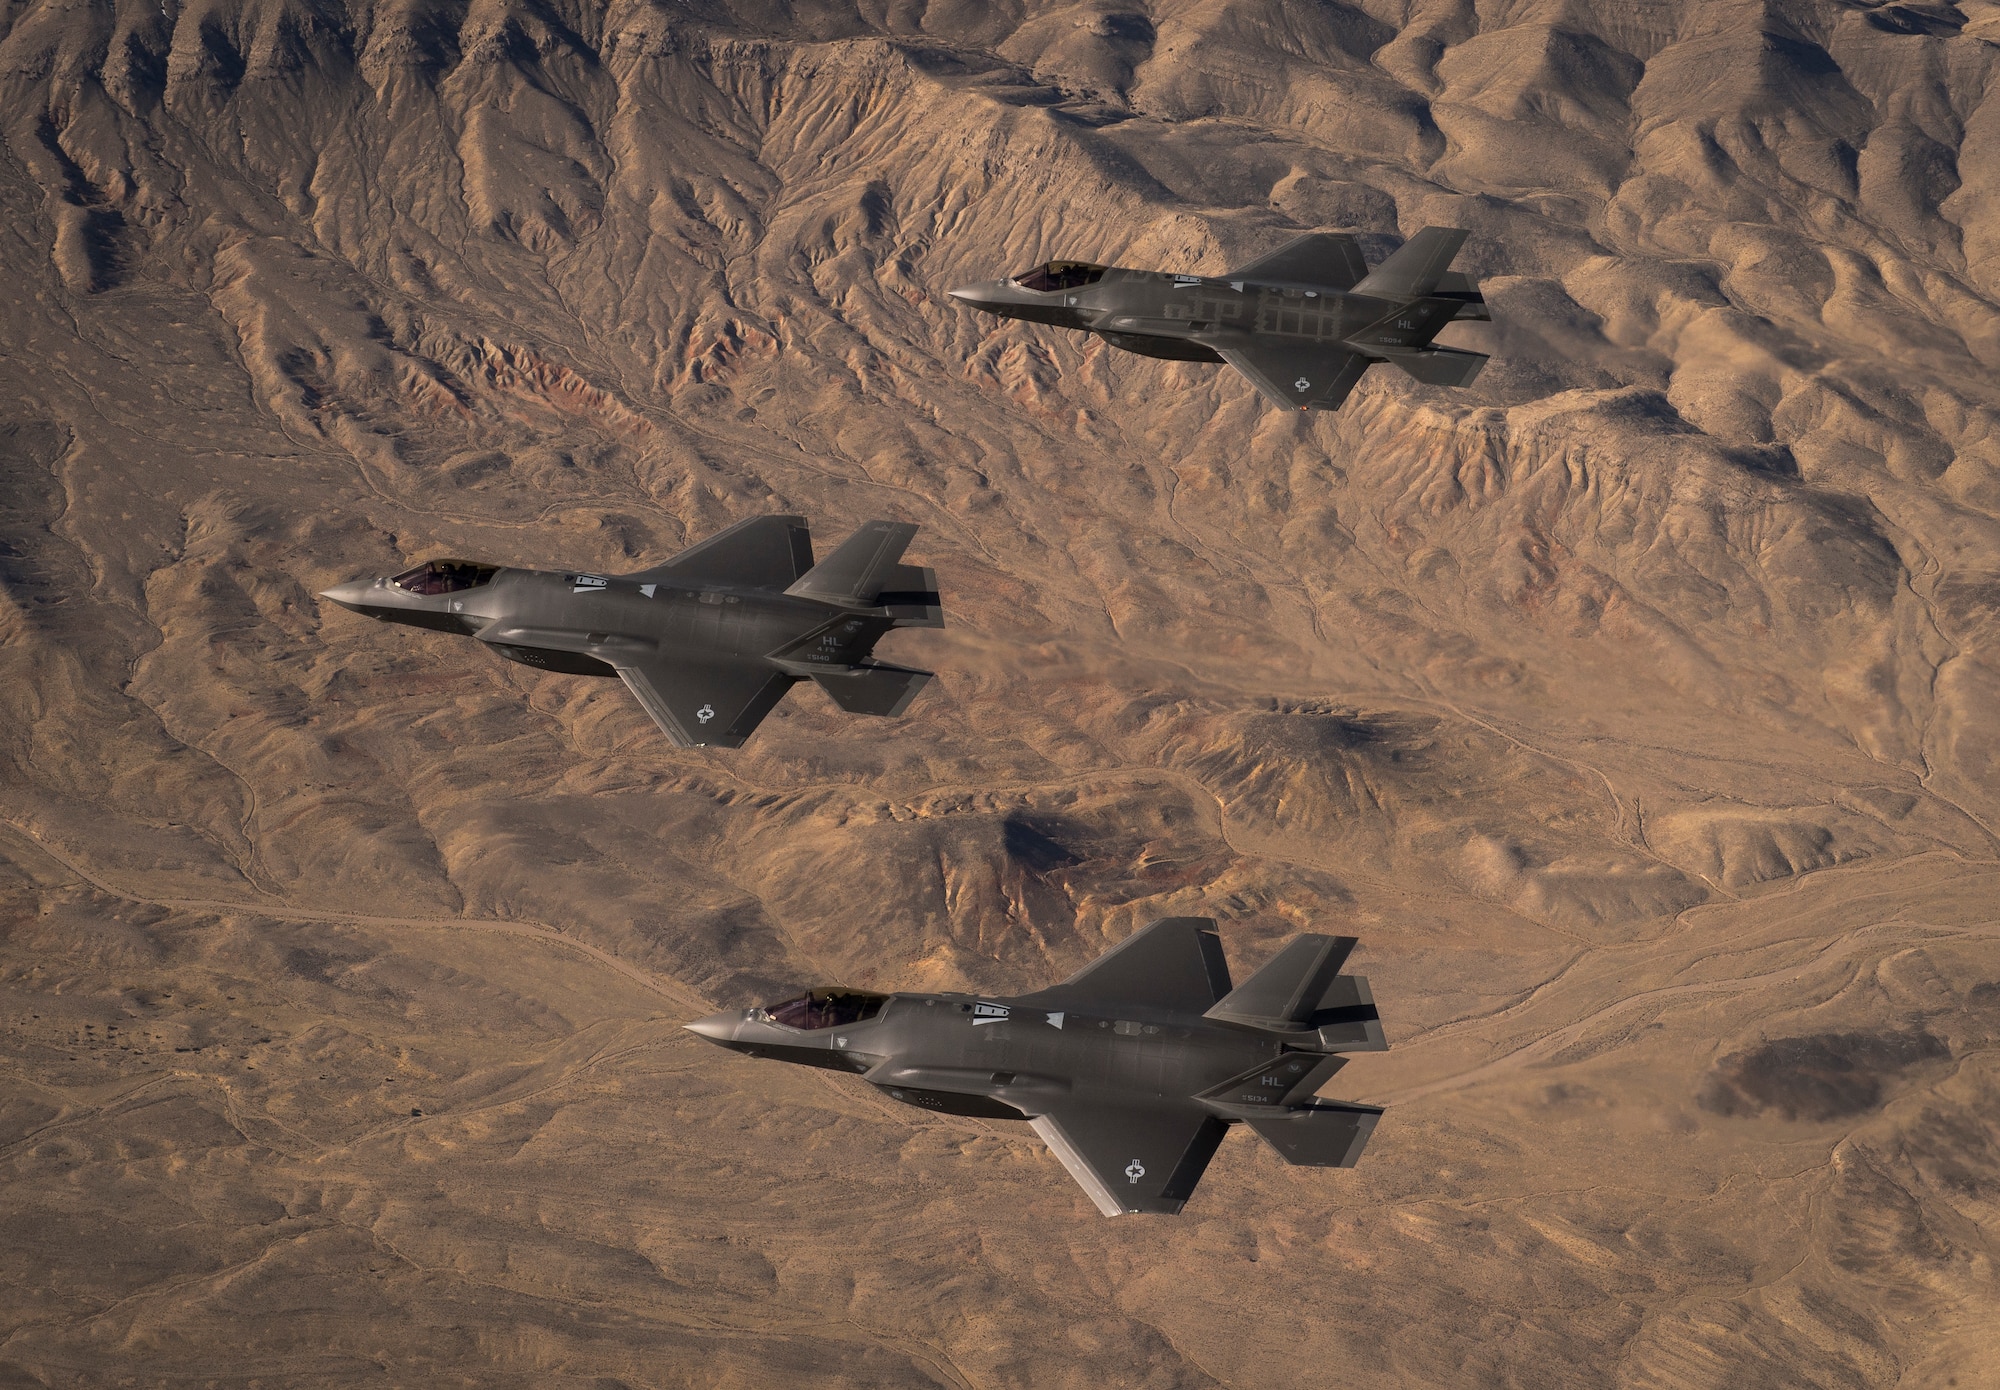 Three U.S. Air Force F-35A Lightning IIs, assigned to the 4th Fighter Squadron from Hill Air Force Base, Utah, conduct flight training operations over the Utah Test and Training Range. The F-35A is a single-seat, single engine, fifth generation, multirole fighter that’s able to perform ground attack, reconnaissance and air defense missions with stealth capability. (U.S. Air Force photo by Staff Sgt. Andrew Lee)